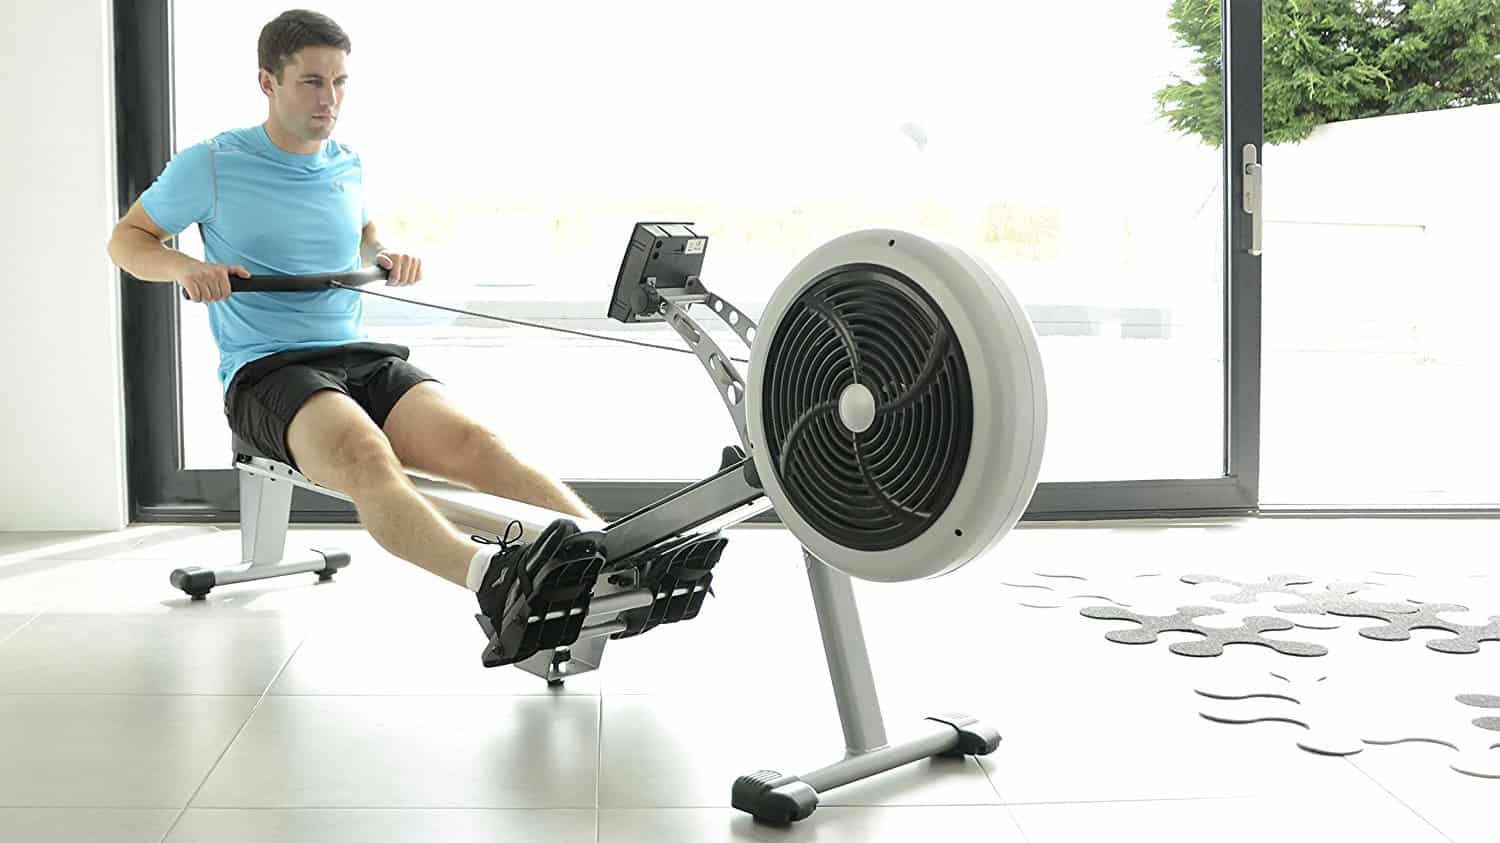 JTX-Freedom-Air-Rower review